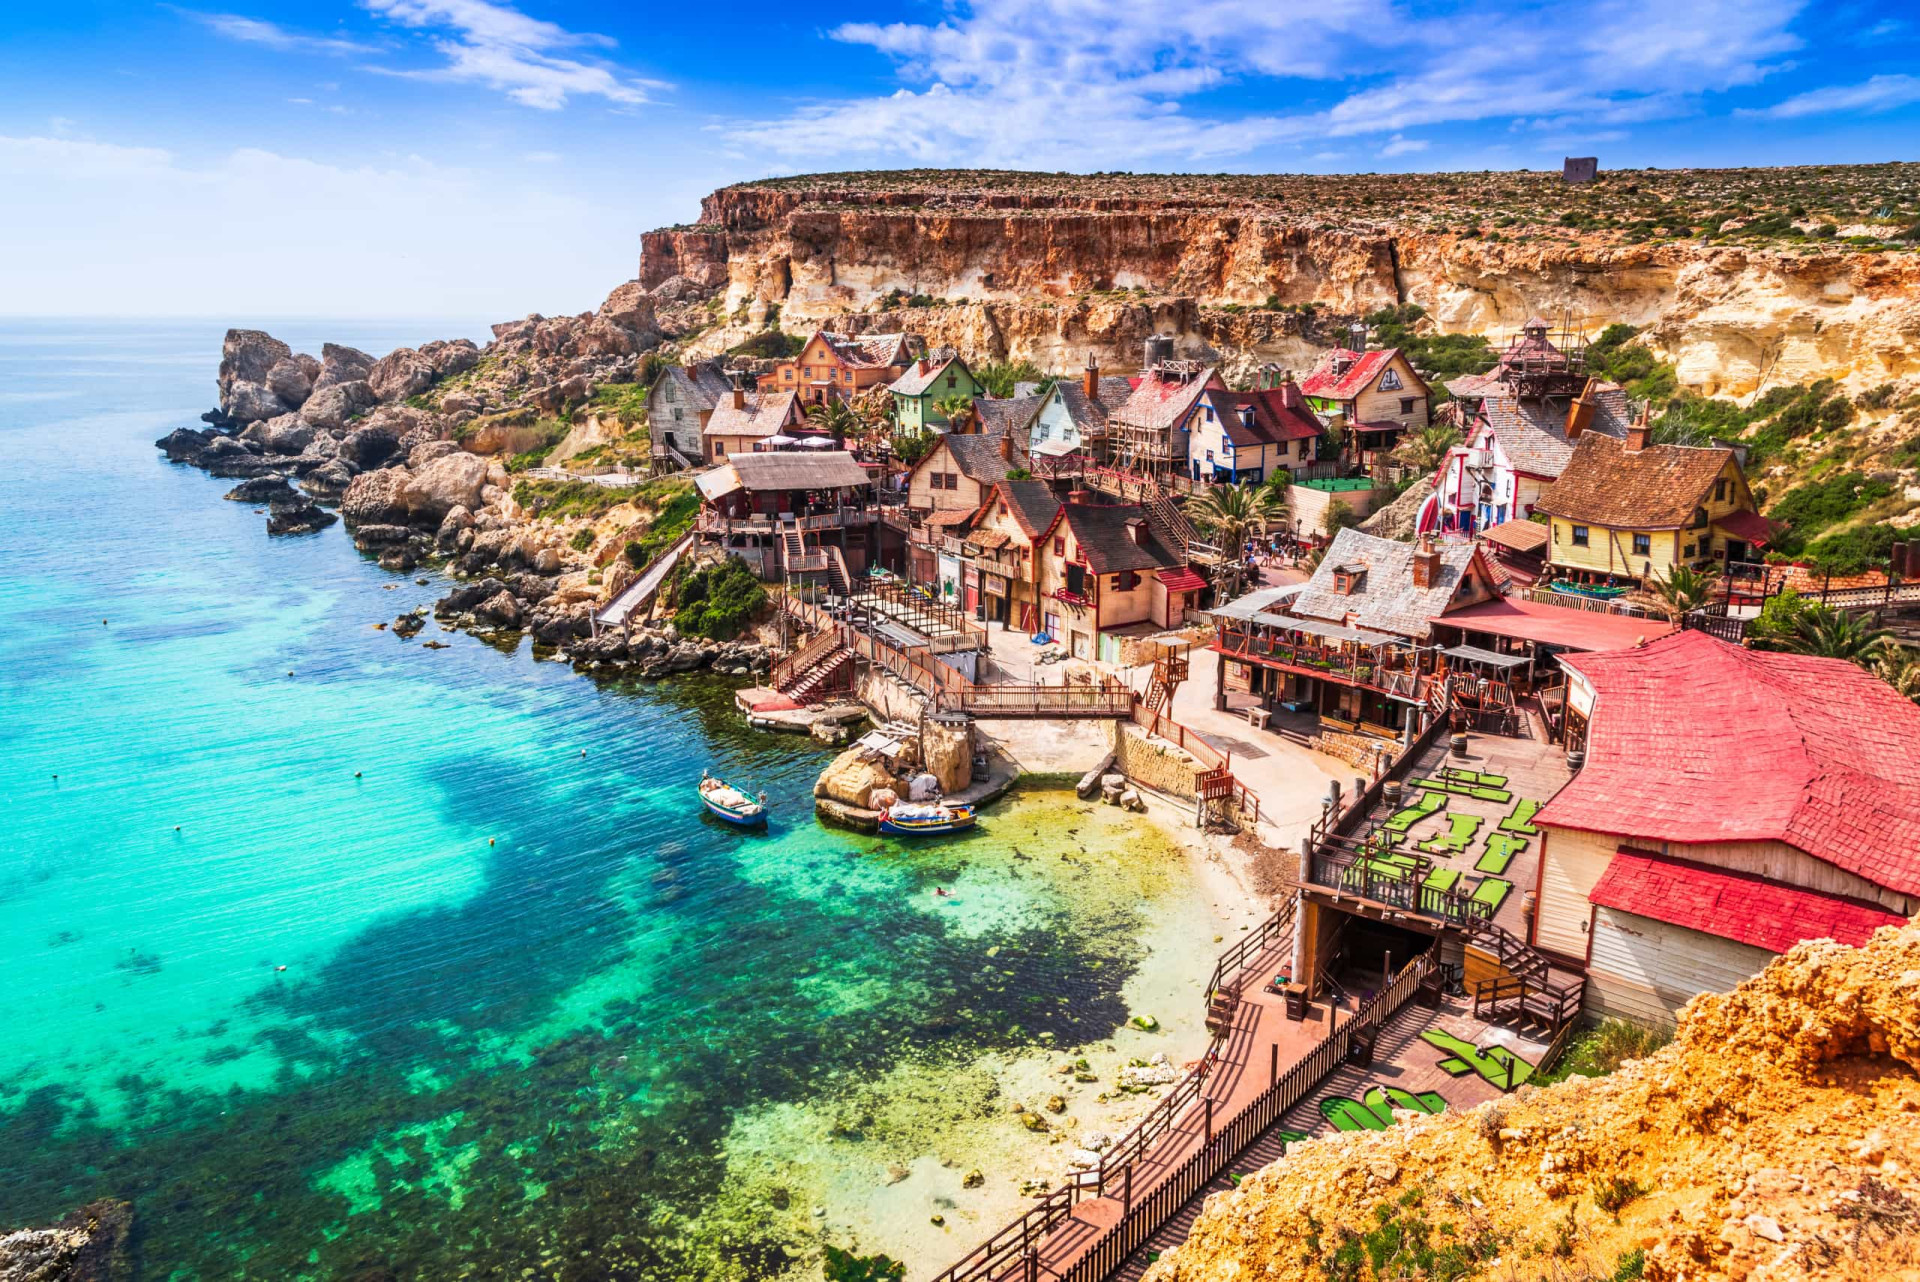 Malta is a <a href="https://uk.starsinsider.com/n/339202/">frequent choice for Hollywood producers</a>. It was famously the location for the 1980 film 'Popeye' starring Robin Williams, which was filmed in the picturesque village of Mellieha.<p><a href="https://www.msn.com/en-us/community/channel/vid-7xx8mnucu55yw63we9va2gwr7uihbxwc68fxqp25x6tg4ftibpra?cvid=94631541bc0f4f89bfd59158d696ad7e">Follow us and access great exclusive content every day</a></p>